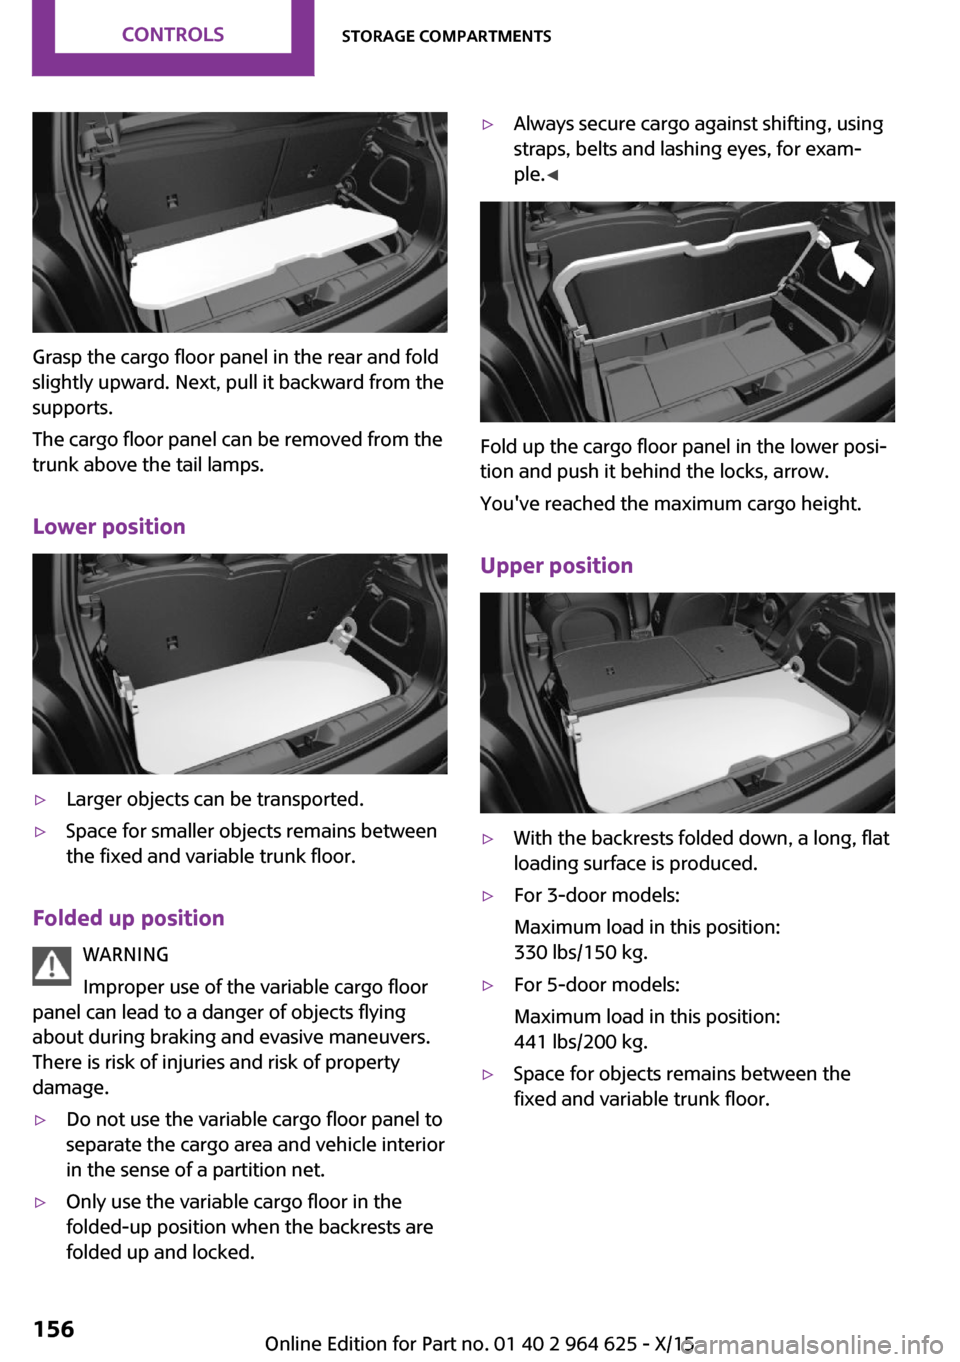 MINI 3 door 2015  Owners Manual Grasp the cargo floor panel in the rear and fold
slightly upward. Next, pull it backward from the
supports.
The cargo floor panel can be removed from the
trunk above the tail lamps.
Lower position
▷